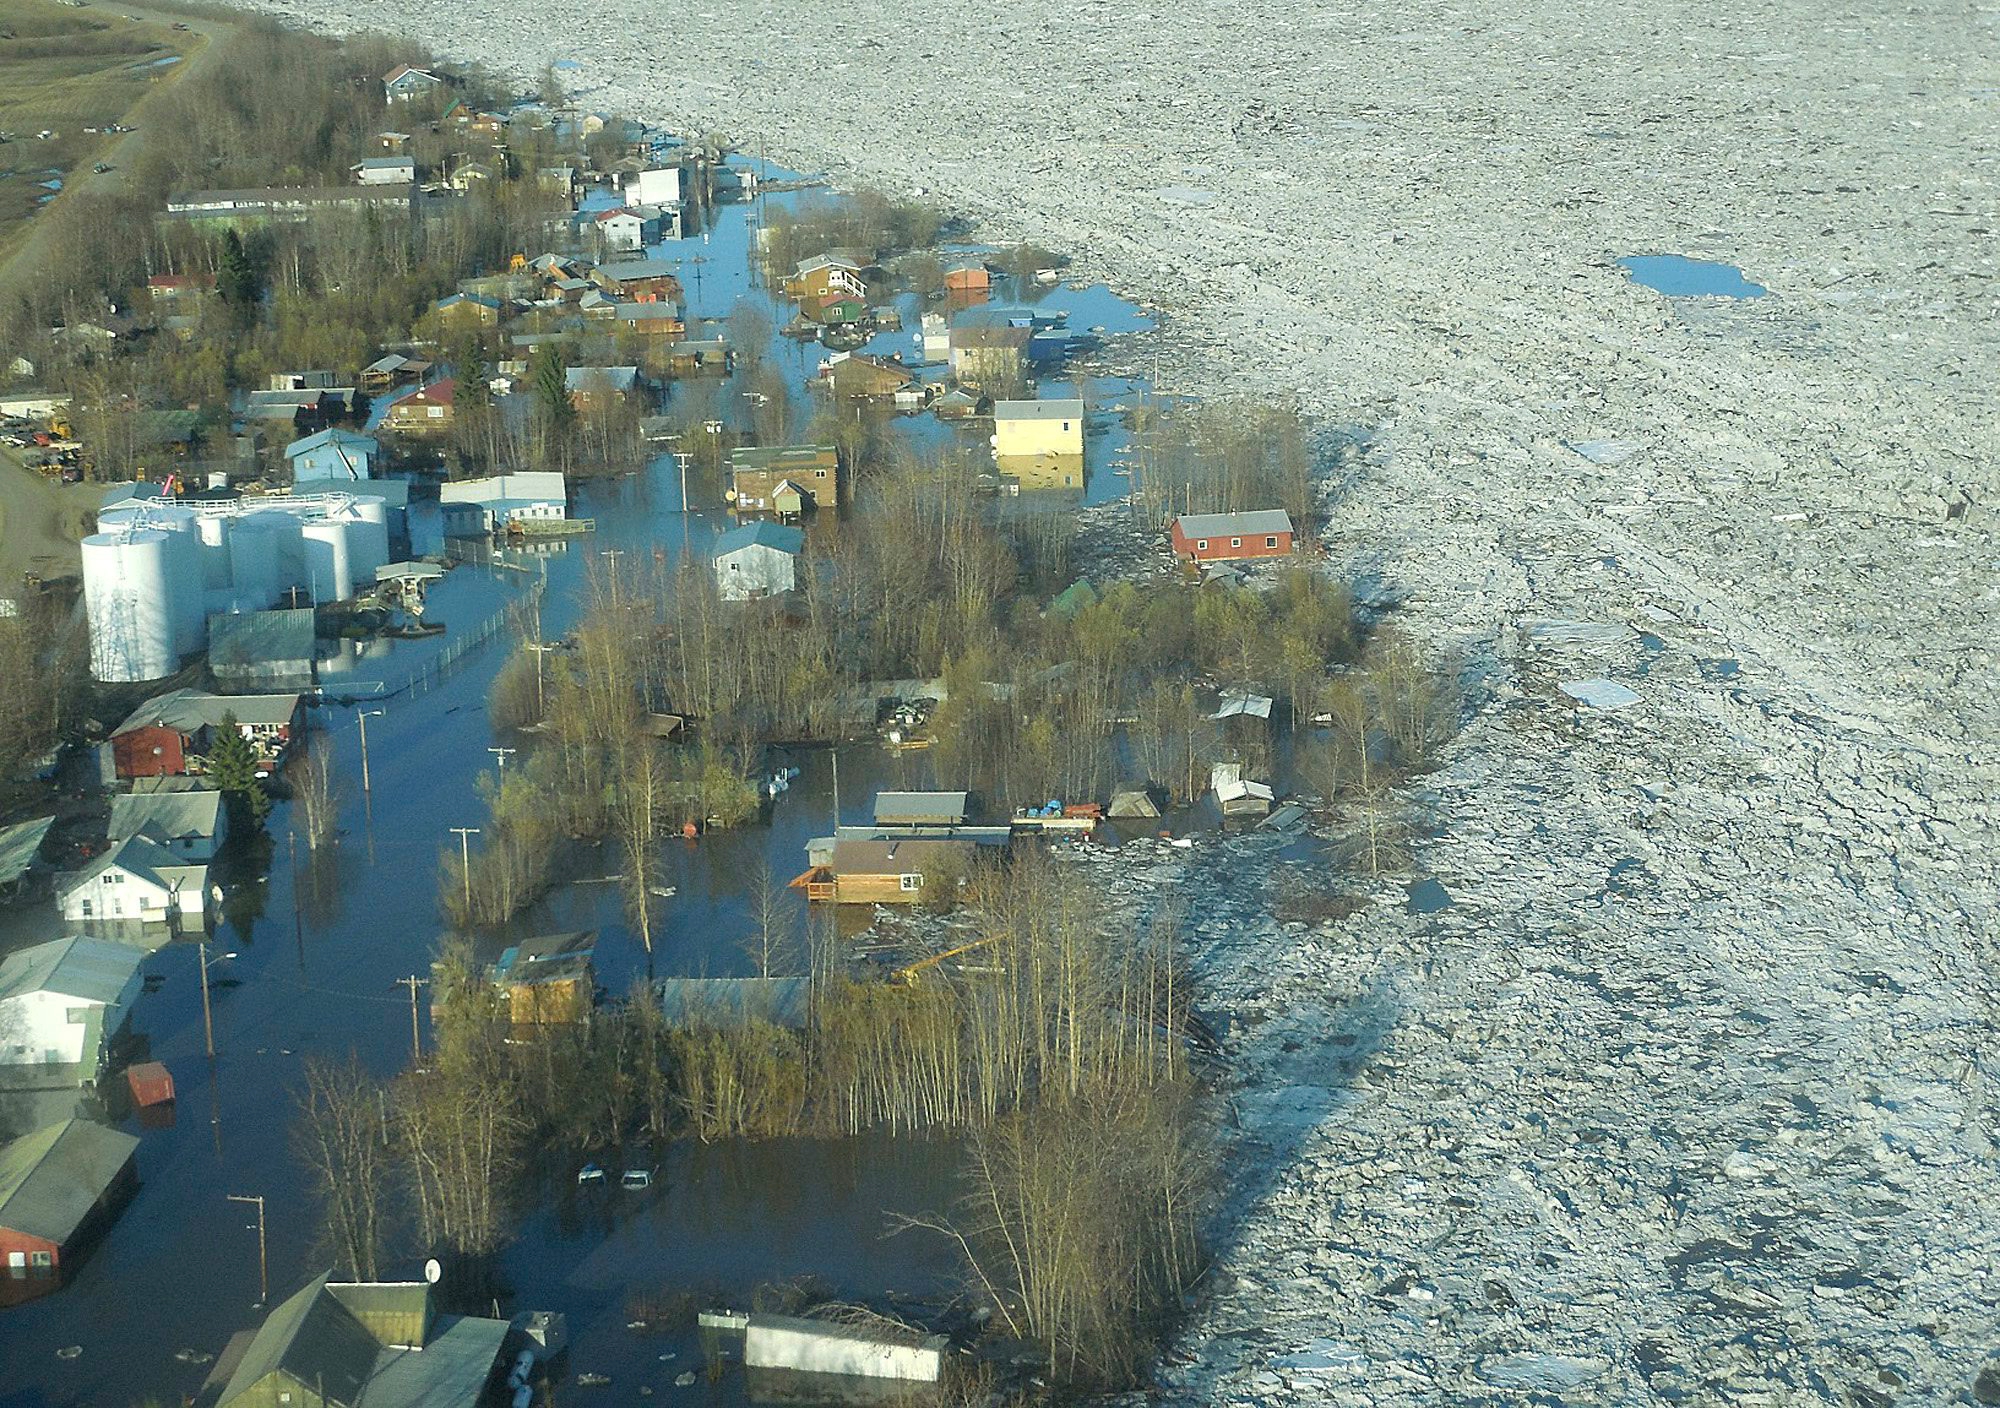 In this May 27, 2013 photo released by the National Weather Service, ice and water are shown flooding homes and other buildings in Galena, Alaska. Several hundred people are estimated to have fled the community of Galena in Alaska's interior, where a river ice jam has caused major flooding, sending water washing over roads and submerging buildings. (AP Photo/National Weather Service, Ed Plumb) Alaska Flooding